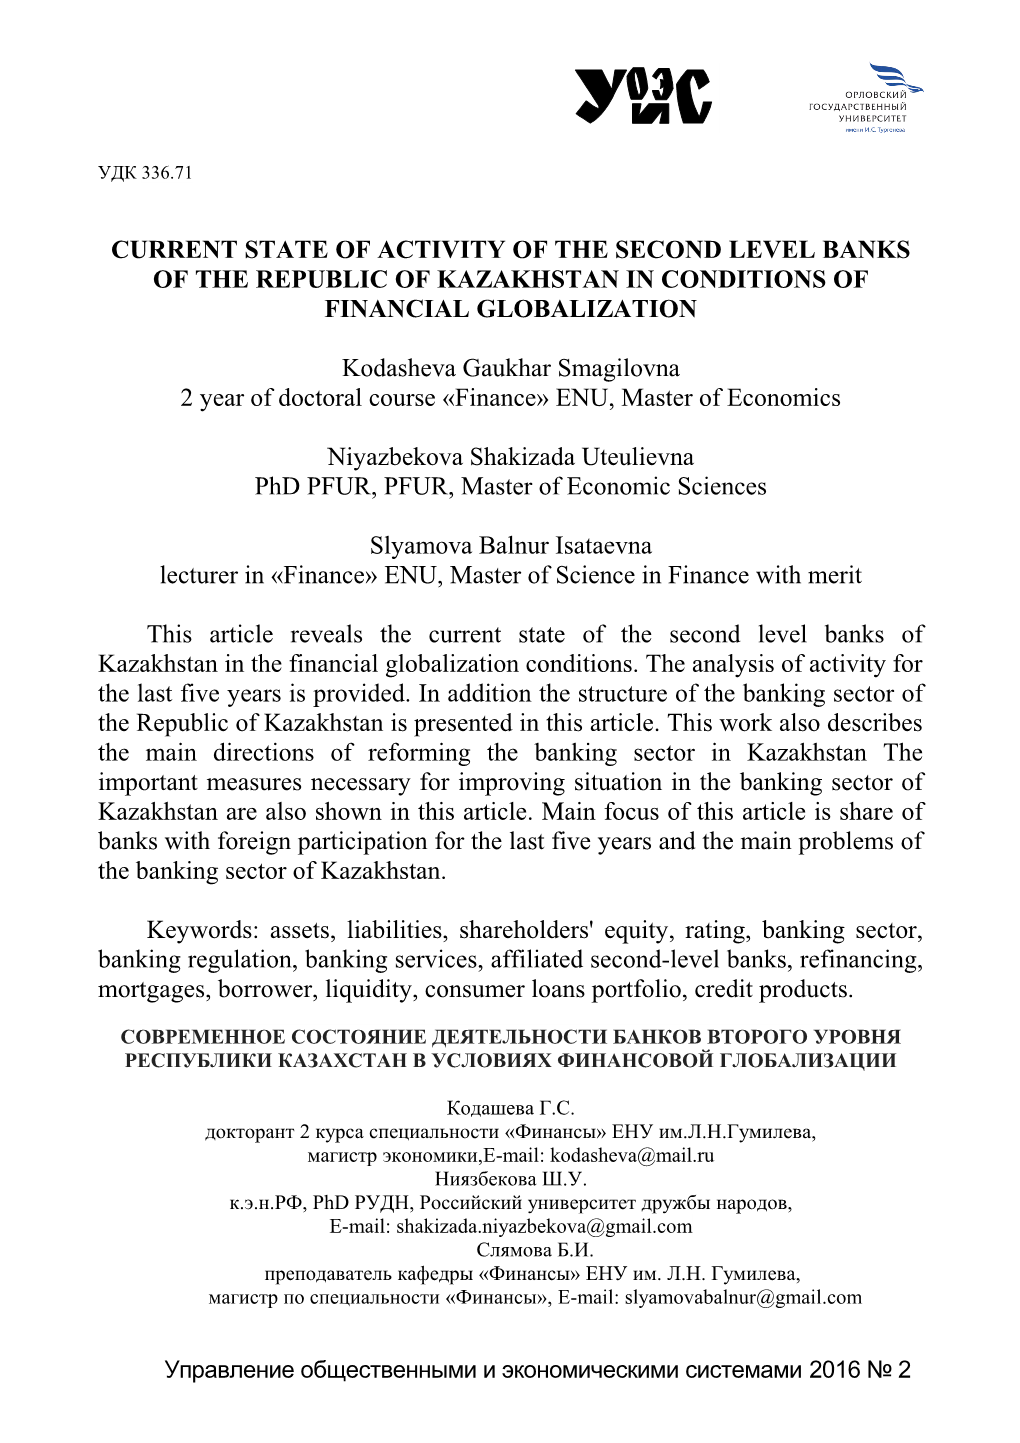 Current State of Activity of the Second Level Banks of the Republic of Kazakhstan in Conditions